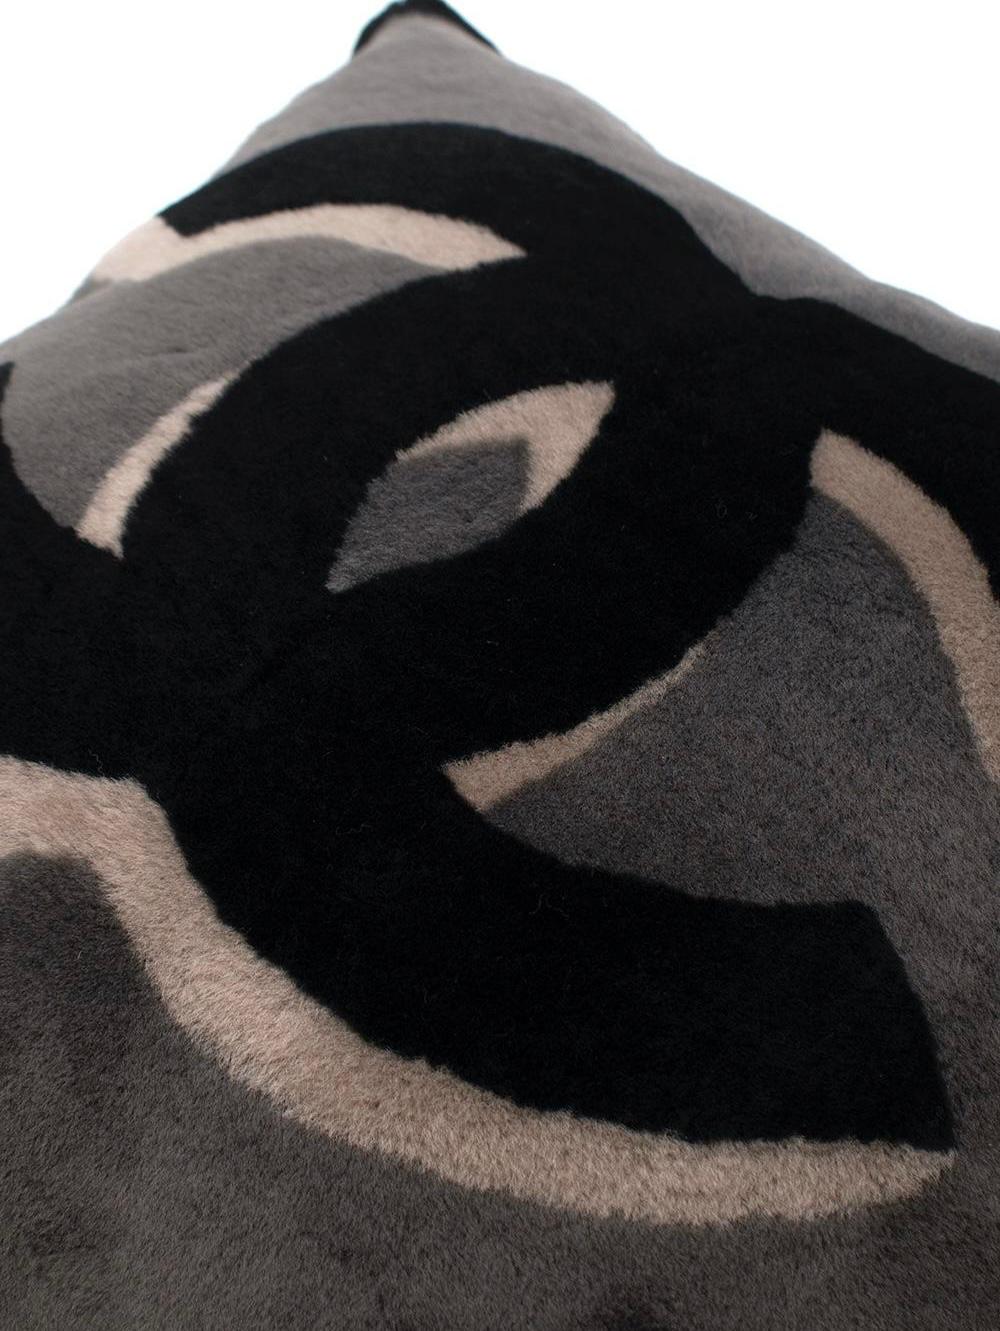 Chanel Grey & Black CC Shearling & Cashmere Pillow

- Shearling front with CC logo in grey and black hues
- Soft cashmere felt back
- Concealed top zip and removable cushion pad

Materials
100% Sheep Shearling
100% Cashmere
Pillow



Made In Italy 